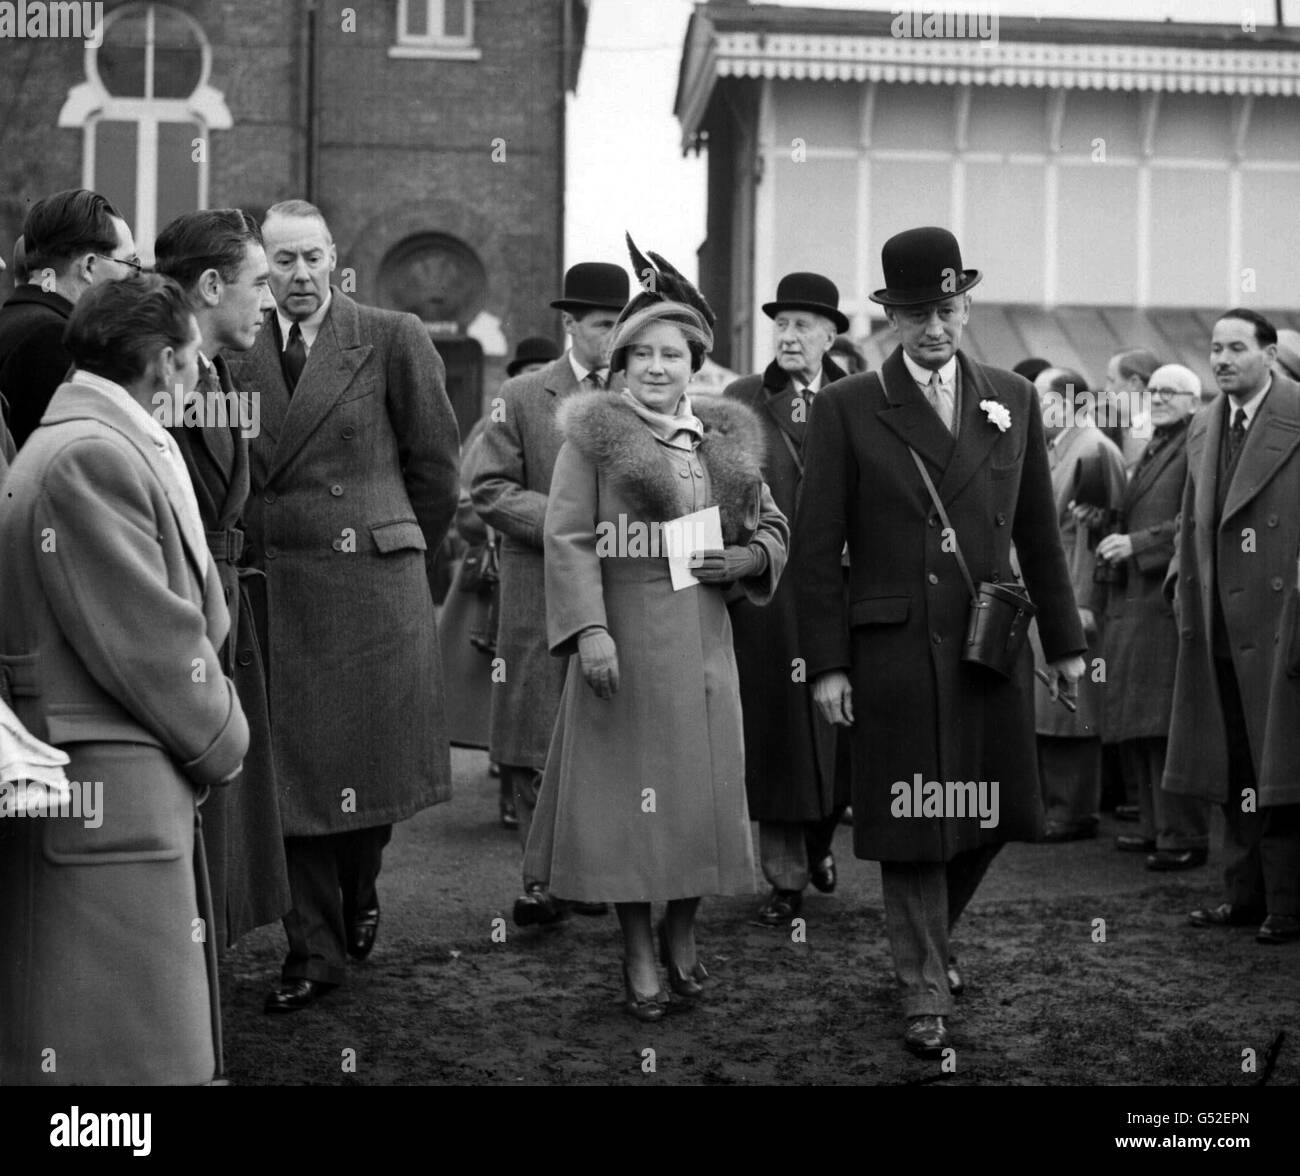 The Queen (The Queen Mother) with Sir Humphrey De Trafford in the paddock at Hurst Park races, where the Queen saw her horse Monaveen, in which she jointly owns with Princess Elizabeth (the Queen) fall in the Queen Elizabeth Steeplechase. Monaveen had to be destroyed. Stock Photo